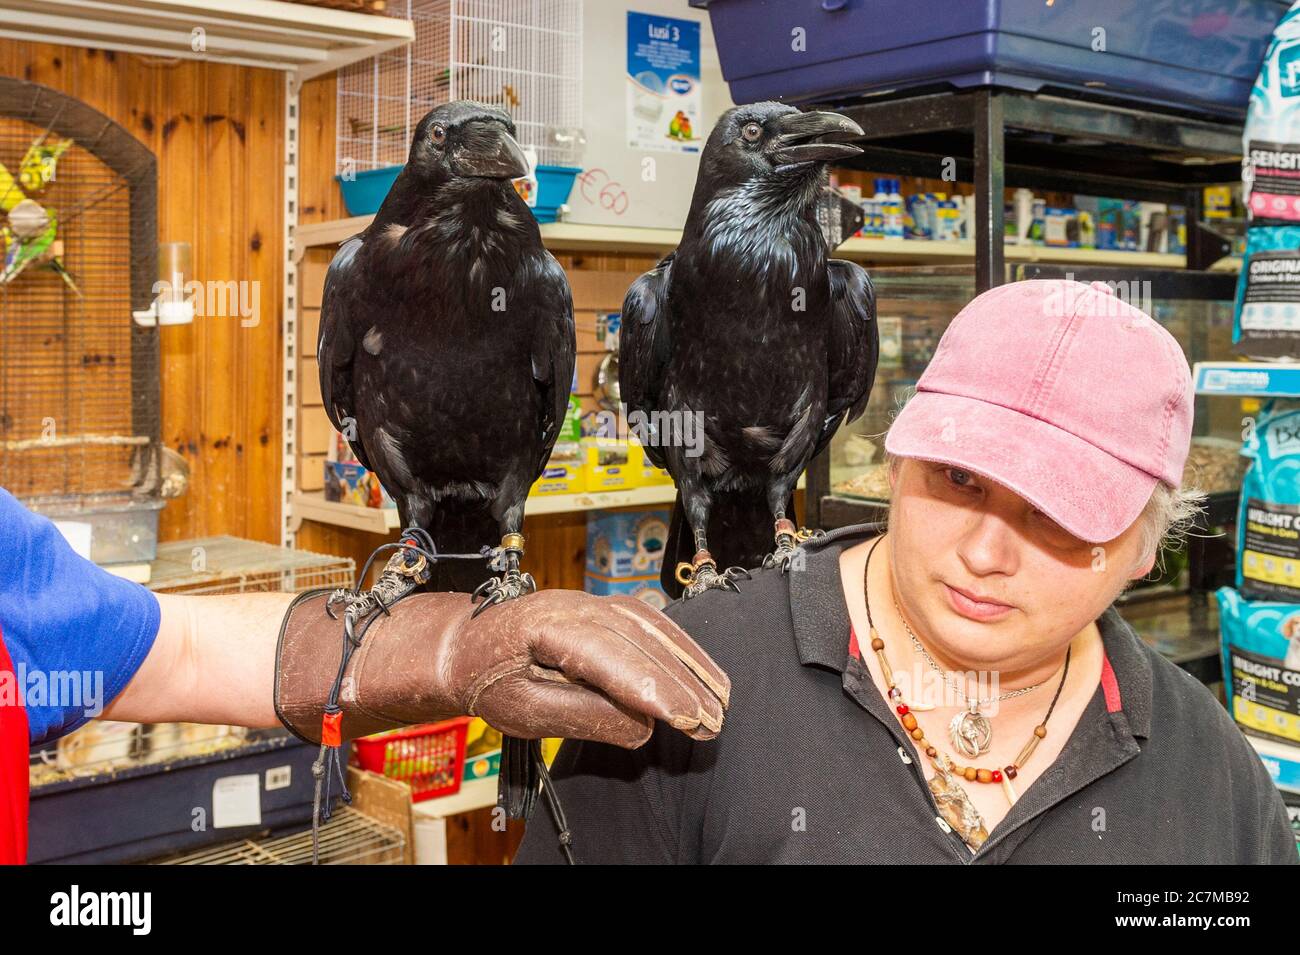 Bantry, West Cork, Ireland. 18th July, 2020. Bantry Pet and Equine Pet Shop, owned and run by Gemma Dale, was host to 2 Ravens this morning. The Ravens have been rehabilitated by Scythe O'Brien of Ravenstone Rehab Centre after they were sent to her by Bantry based vet, Fachtna Collins. Because of their on-going health issues, the birds cannot be released into the wild and therefore stay at the Rehab Centre as long term residents. The centre is not a charity and is funded wholly by Scythe O'Brien. Credit: AG News/Alamy Live News Stock Photo